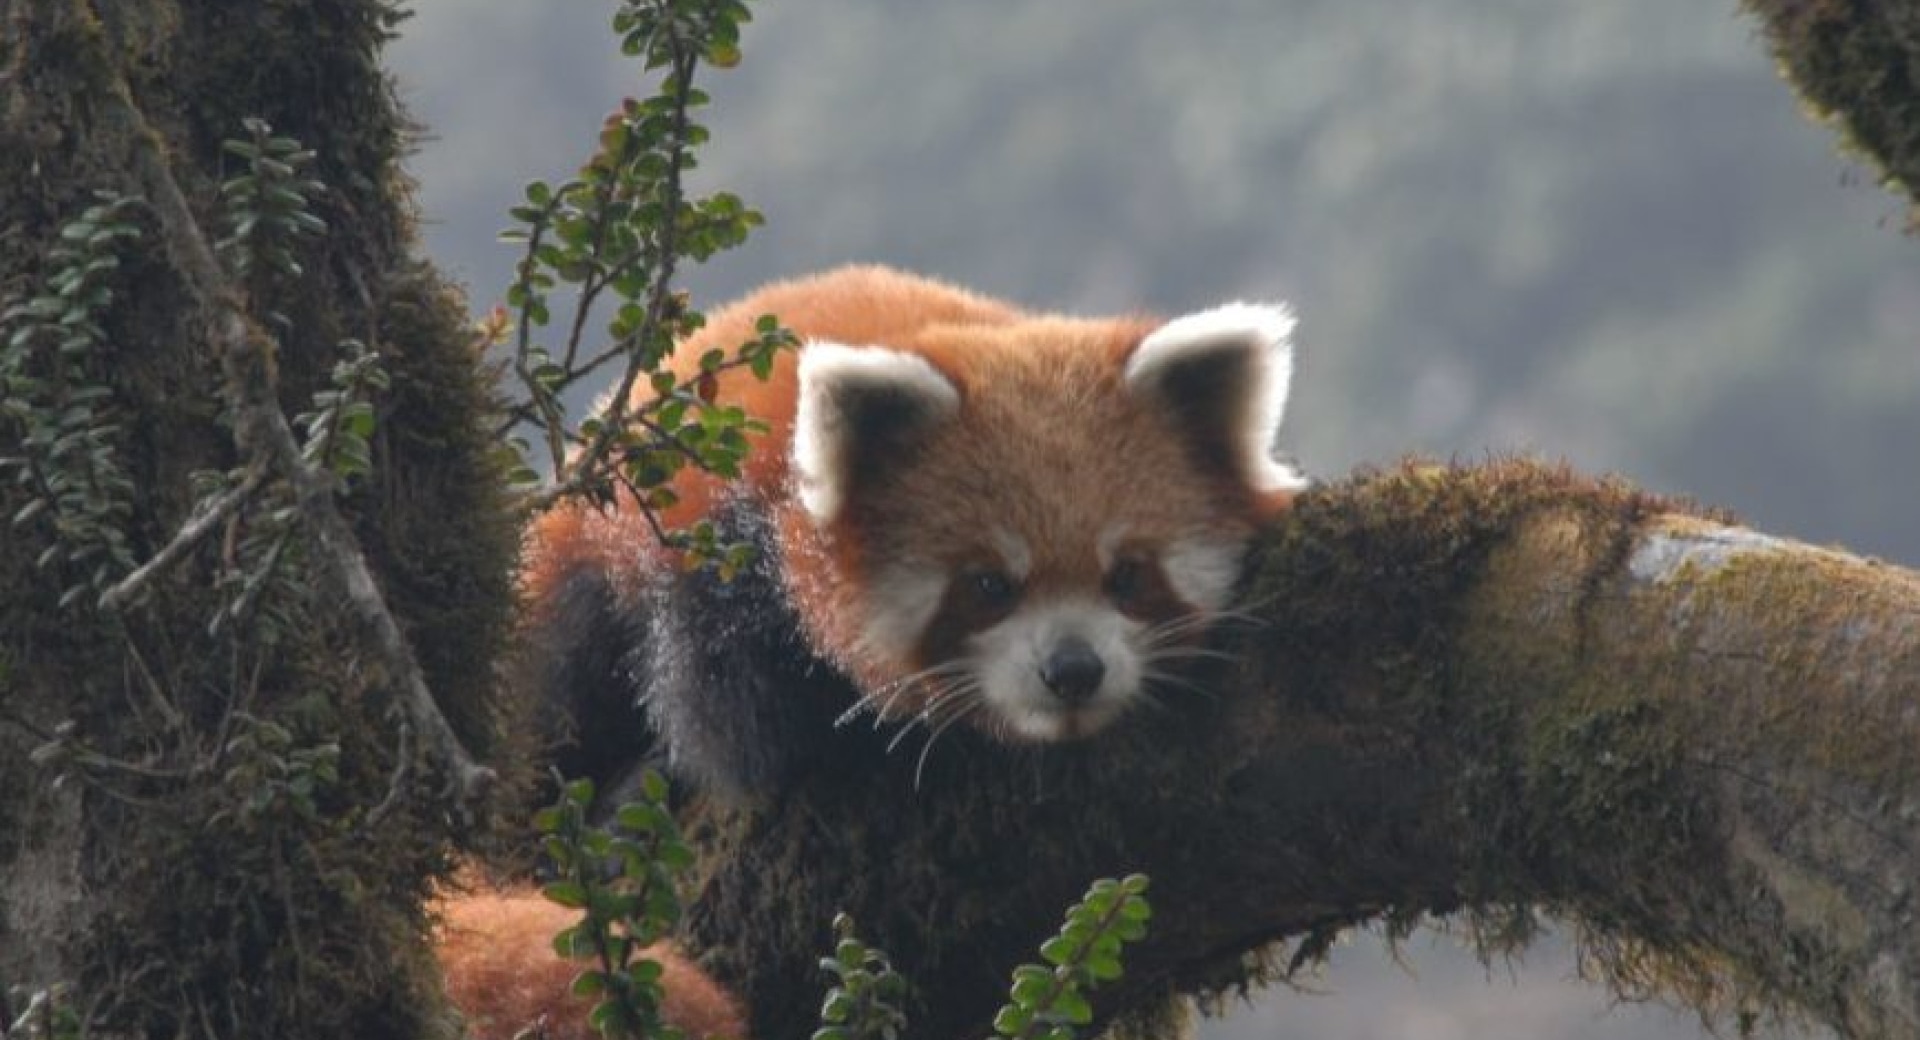 The Road to Deurali: Building a Future for People and Red Pandas